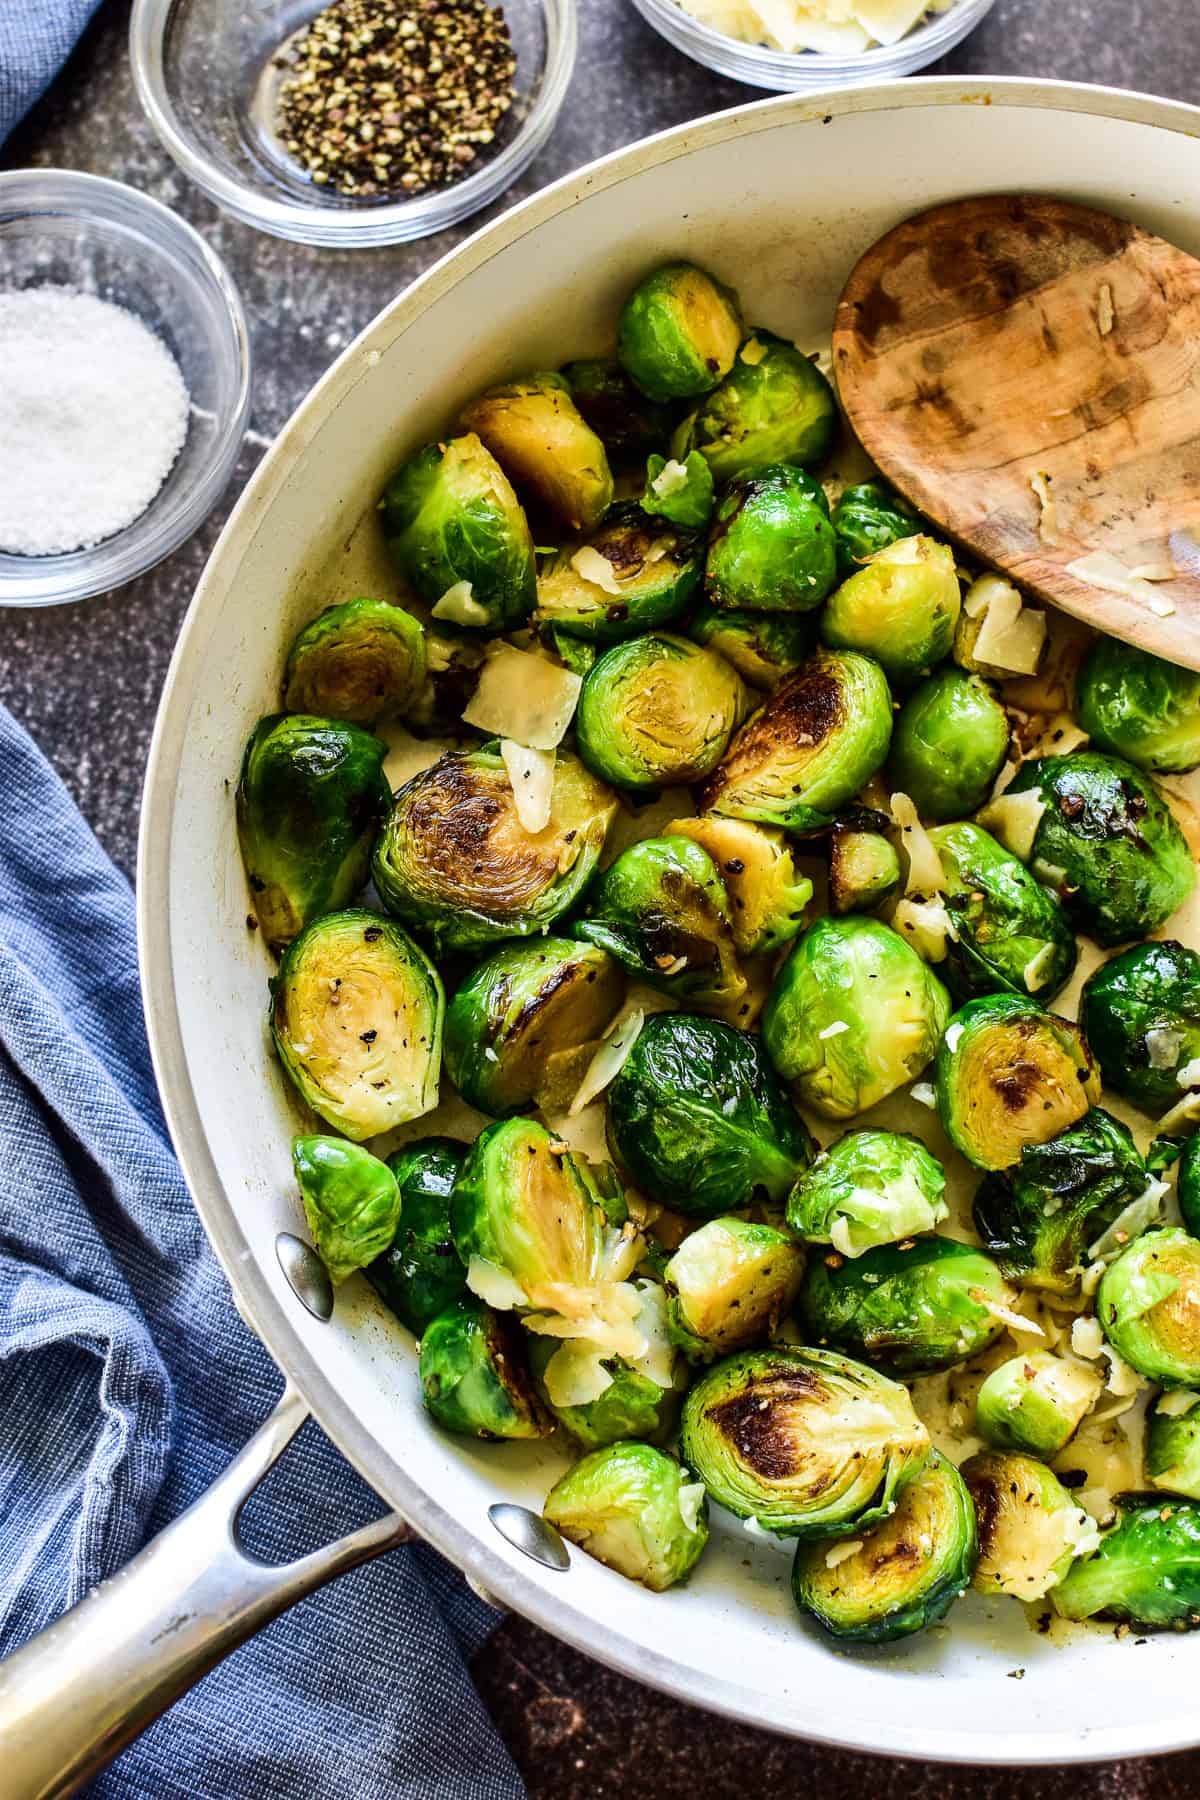 Overhead shot of Sauteed Brussel Sprouts in skillet with wooden spoon